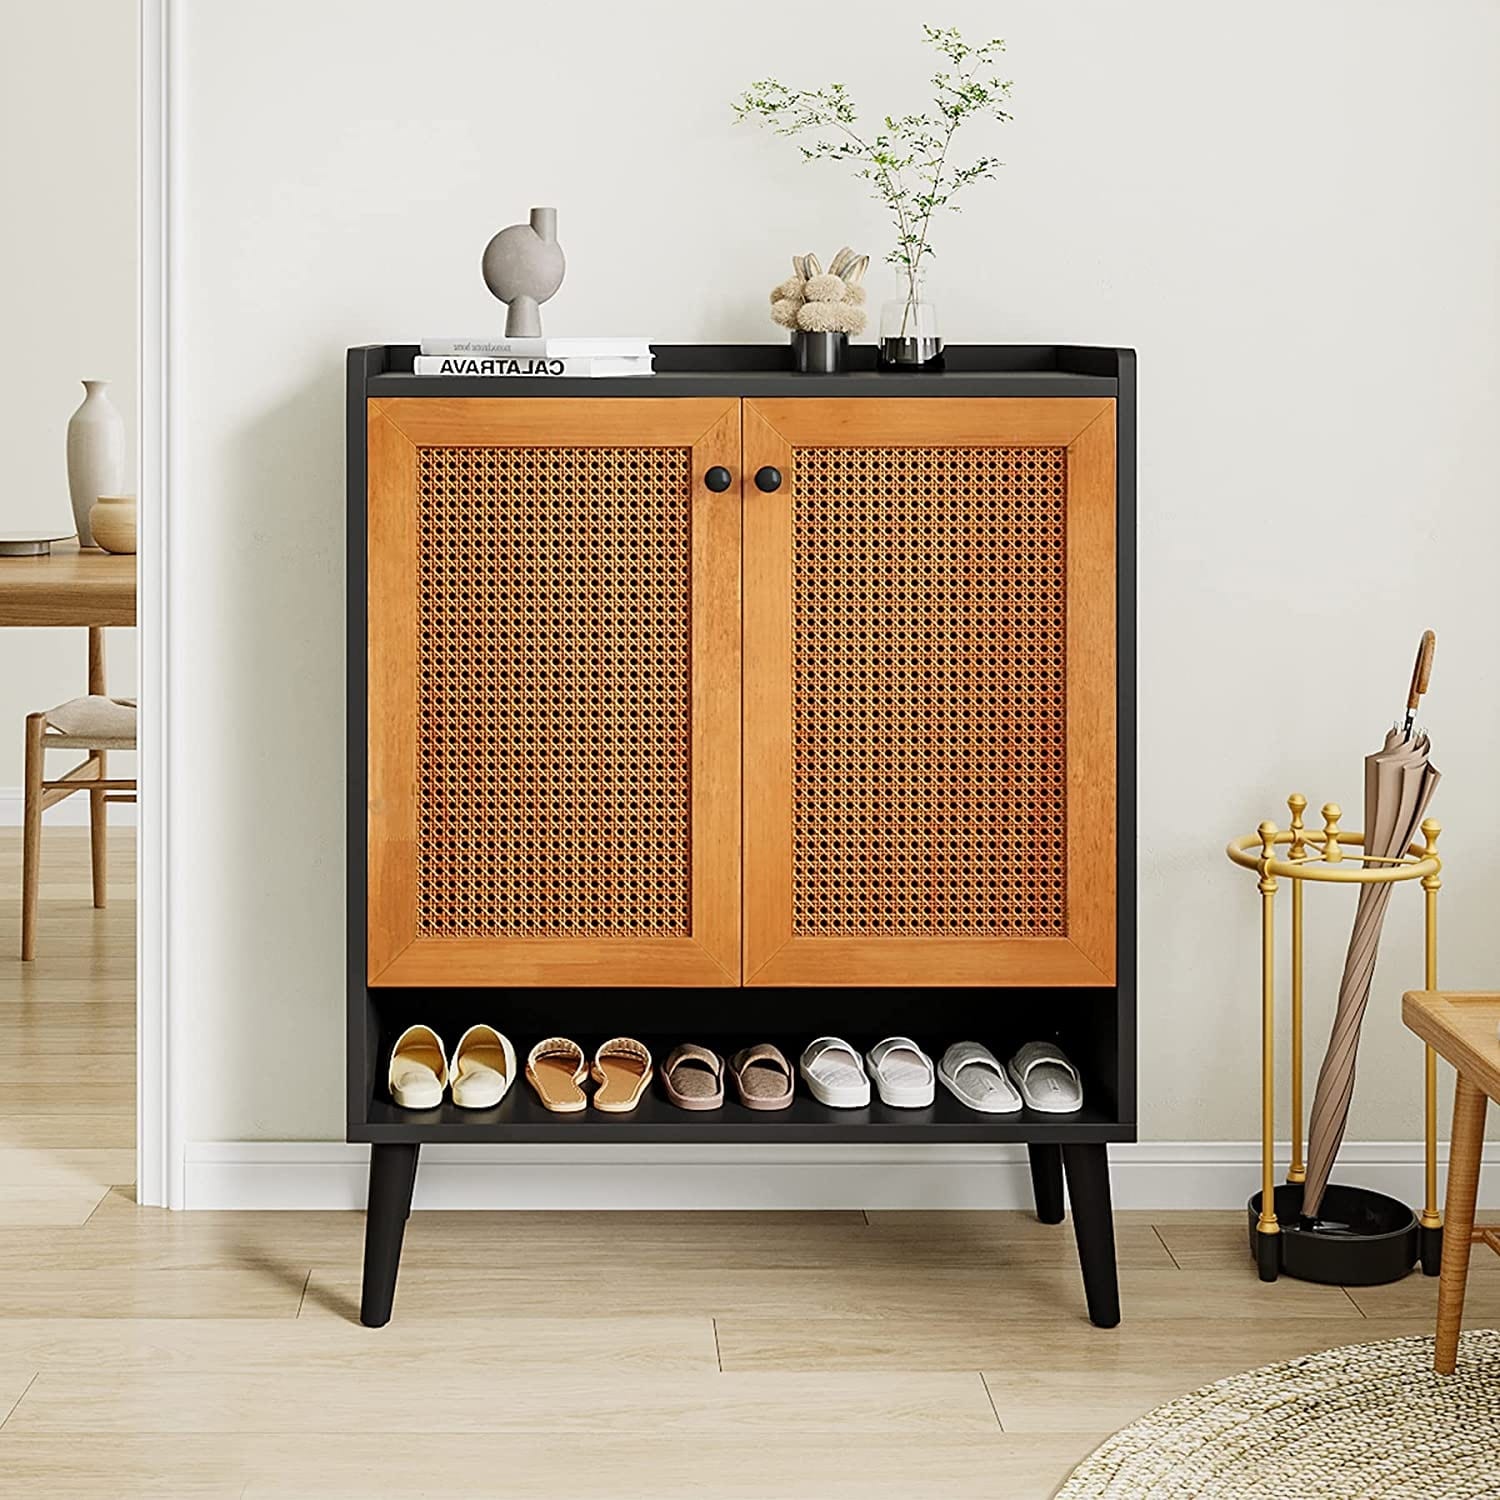 https://ak1.ostkcdn.com/images/products/is/images/direct/4a1c6319fd171f3e1e6614a4684508cc33ba8058/Shoe-Cabinet%2C-Rattan-Shoe-Rack-Organizer%2C-6-Tiers-24-30-Pairs-Heavy-Duty-Shoe-Storage-Cabinet-with-Doors-for-Entryway.jpg